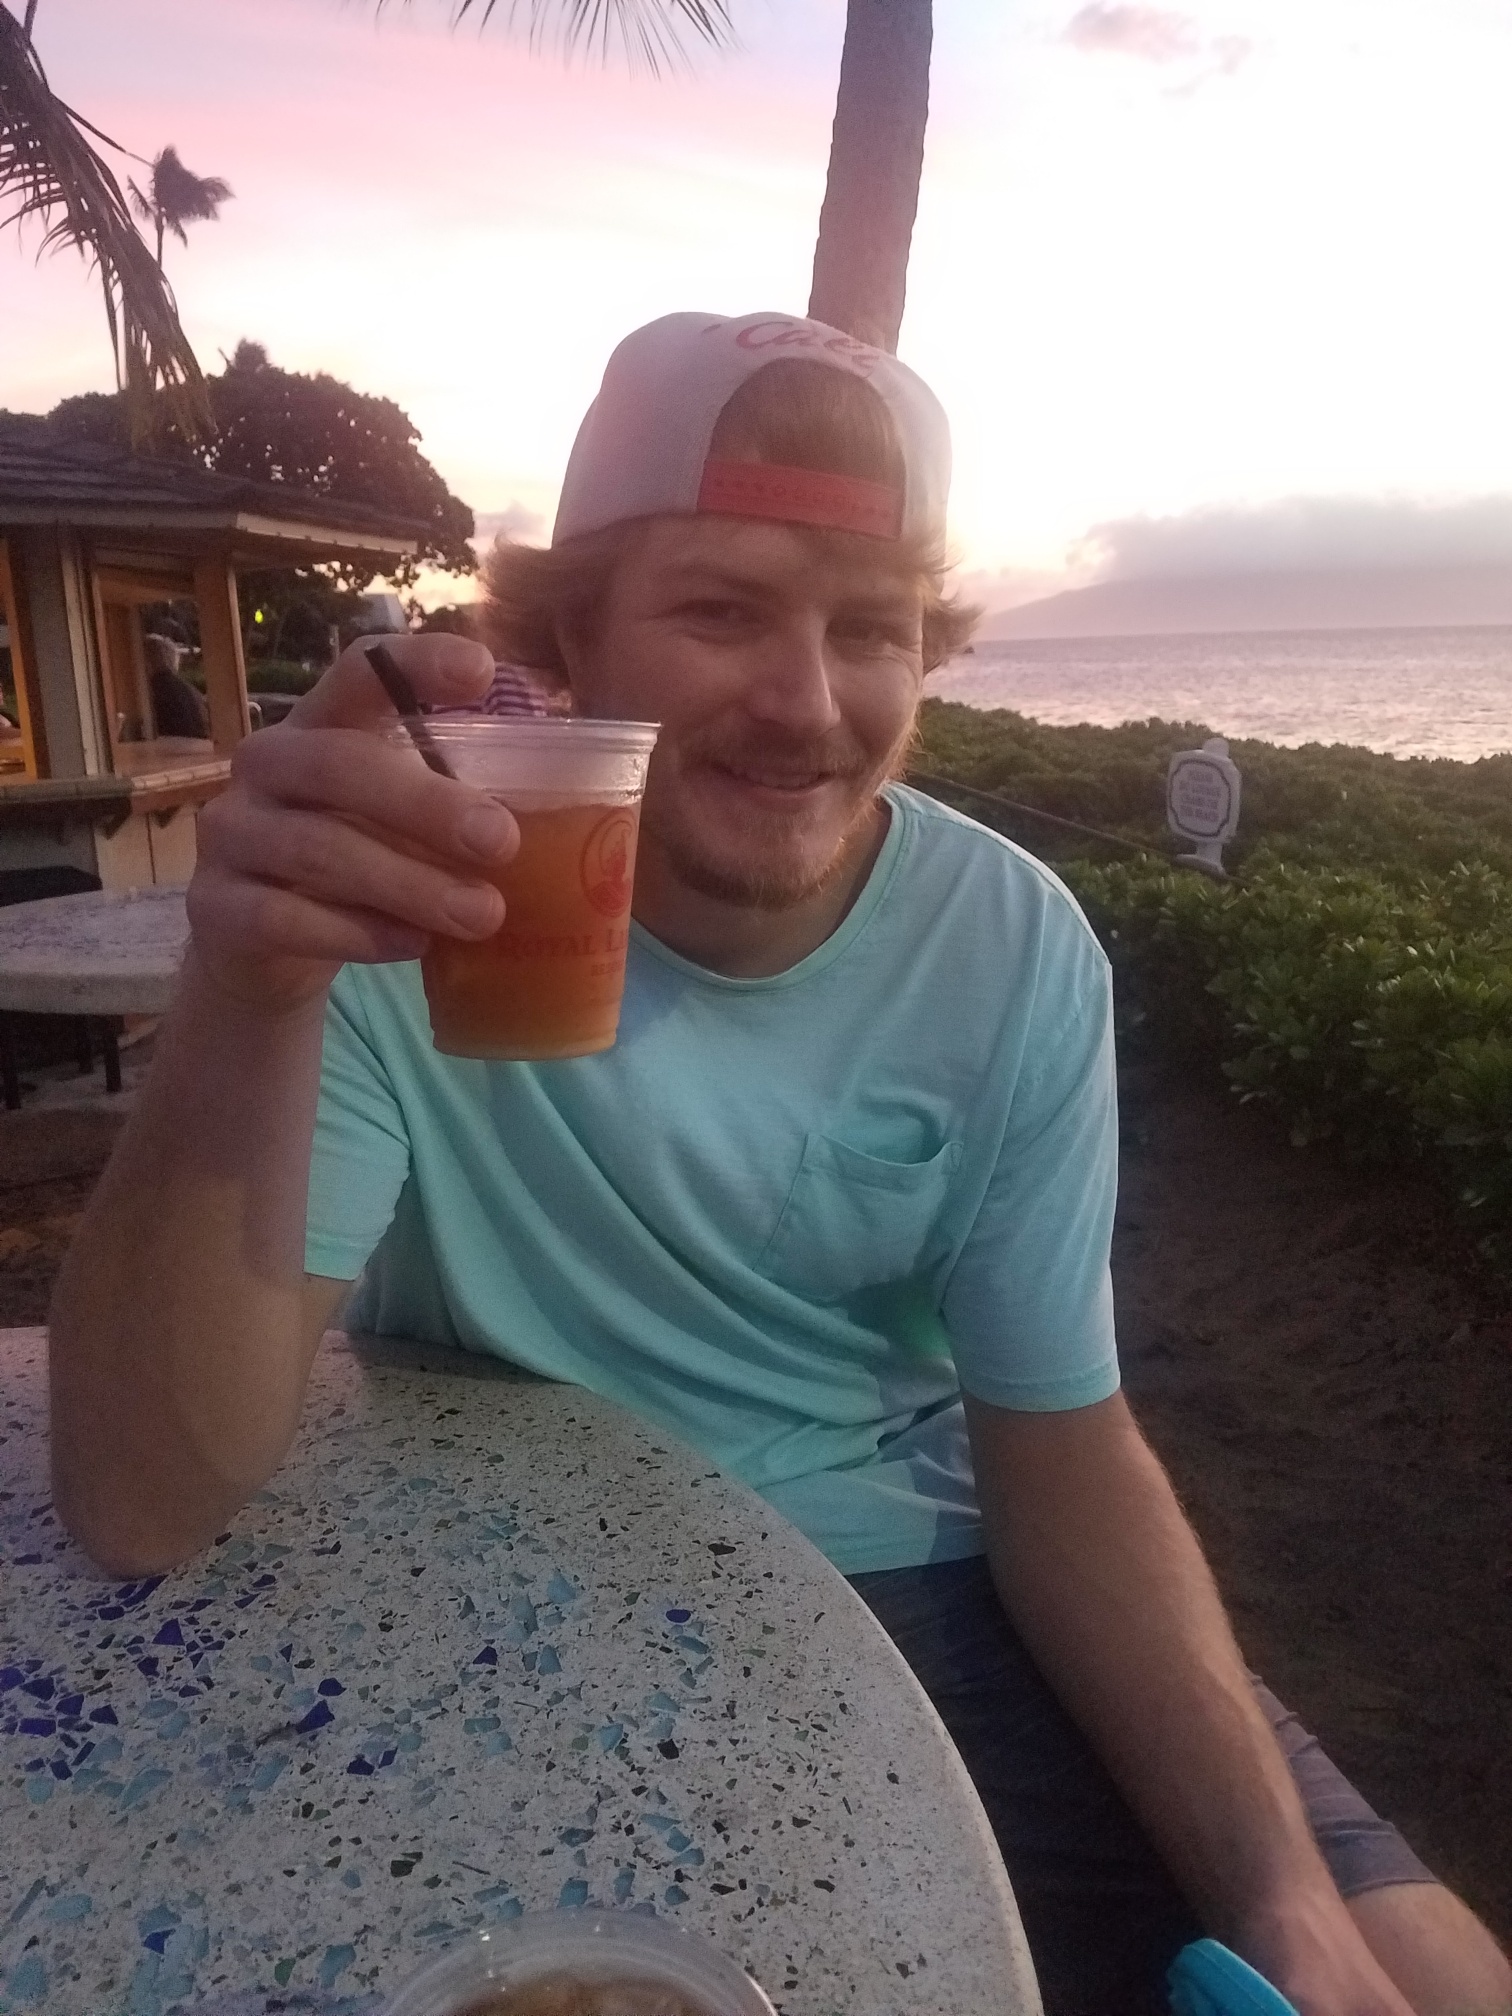 Man with hat and drink on beach